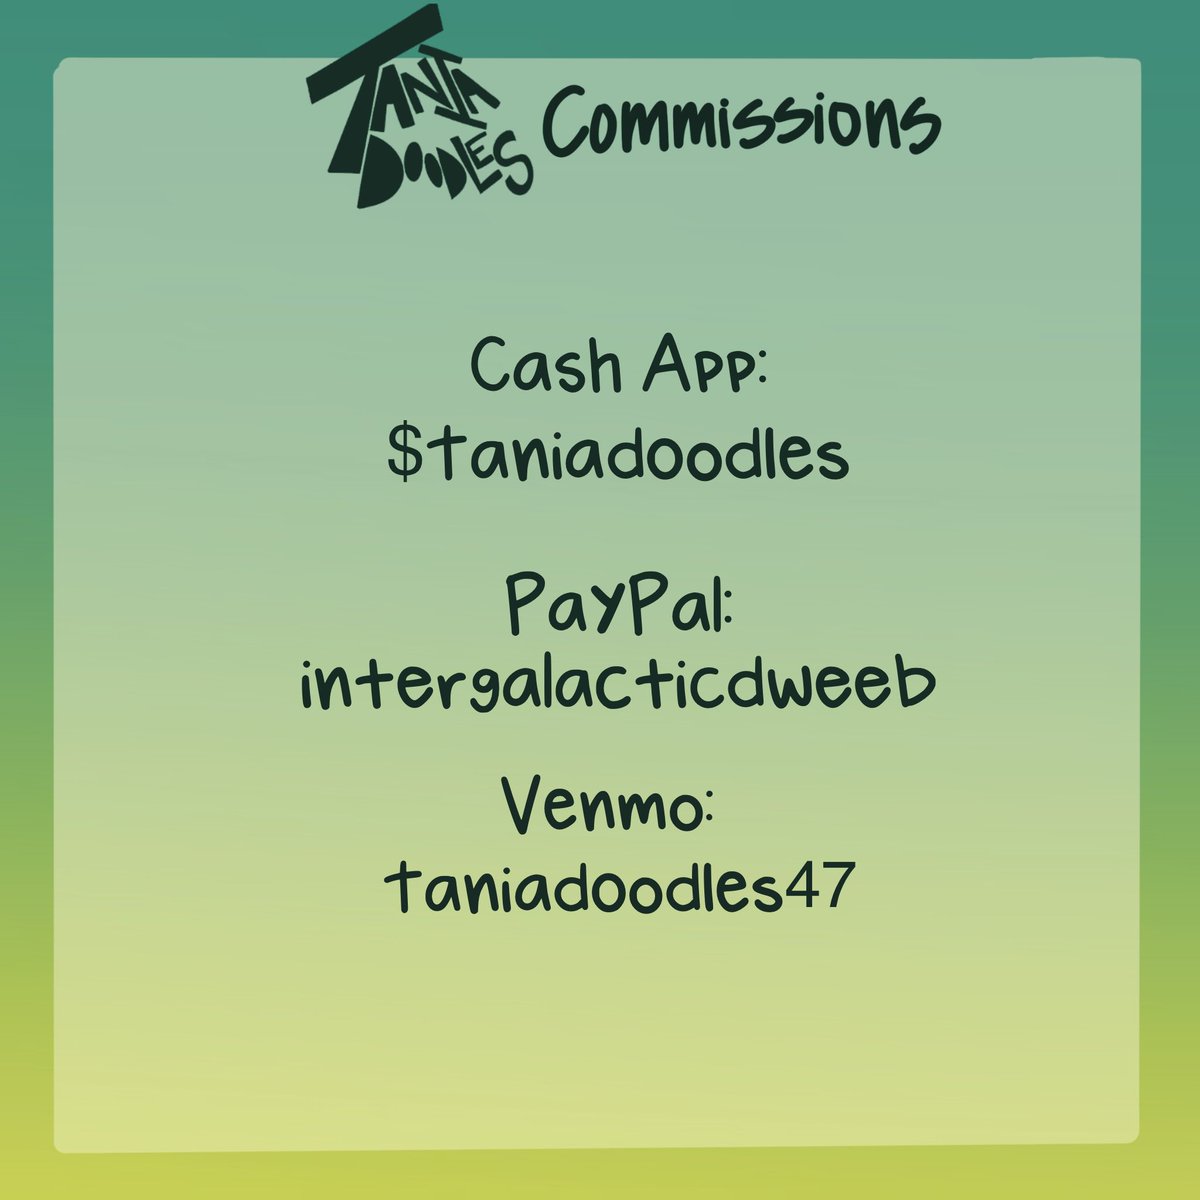 Hey guys! I don’t have much time to pay my bills. I have until the 26th to have $750 for rent, insurance and my phone bill. Since I’ve been doing small training shifts at my new job, my first paycheck didn’t cover much. I’m taking tips, donations and my commissions are open!! 1/3